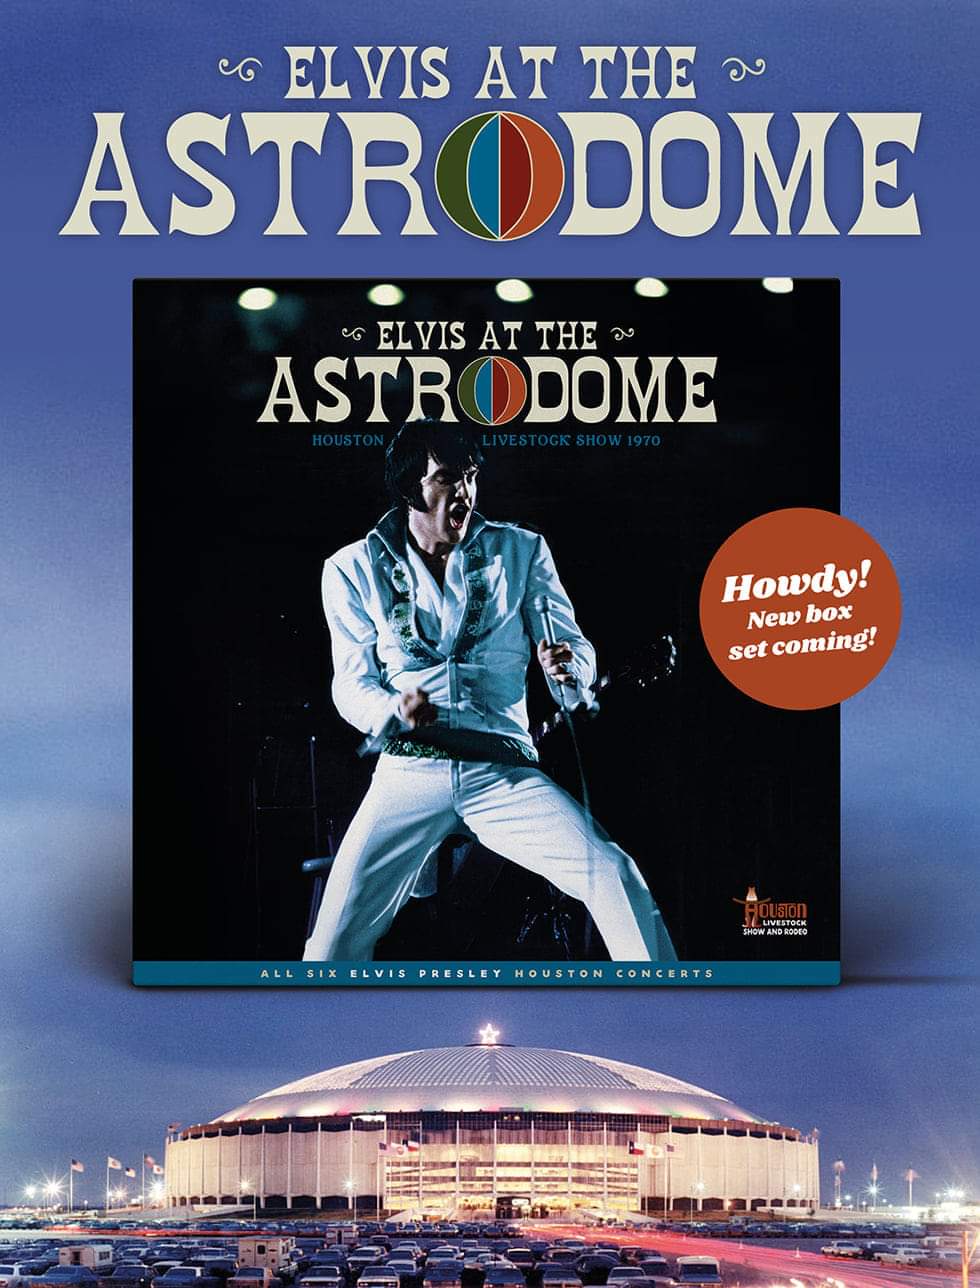 "ELVIS AT THE ASTRODOME BOX-SET"